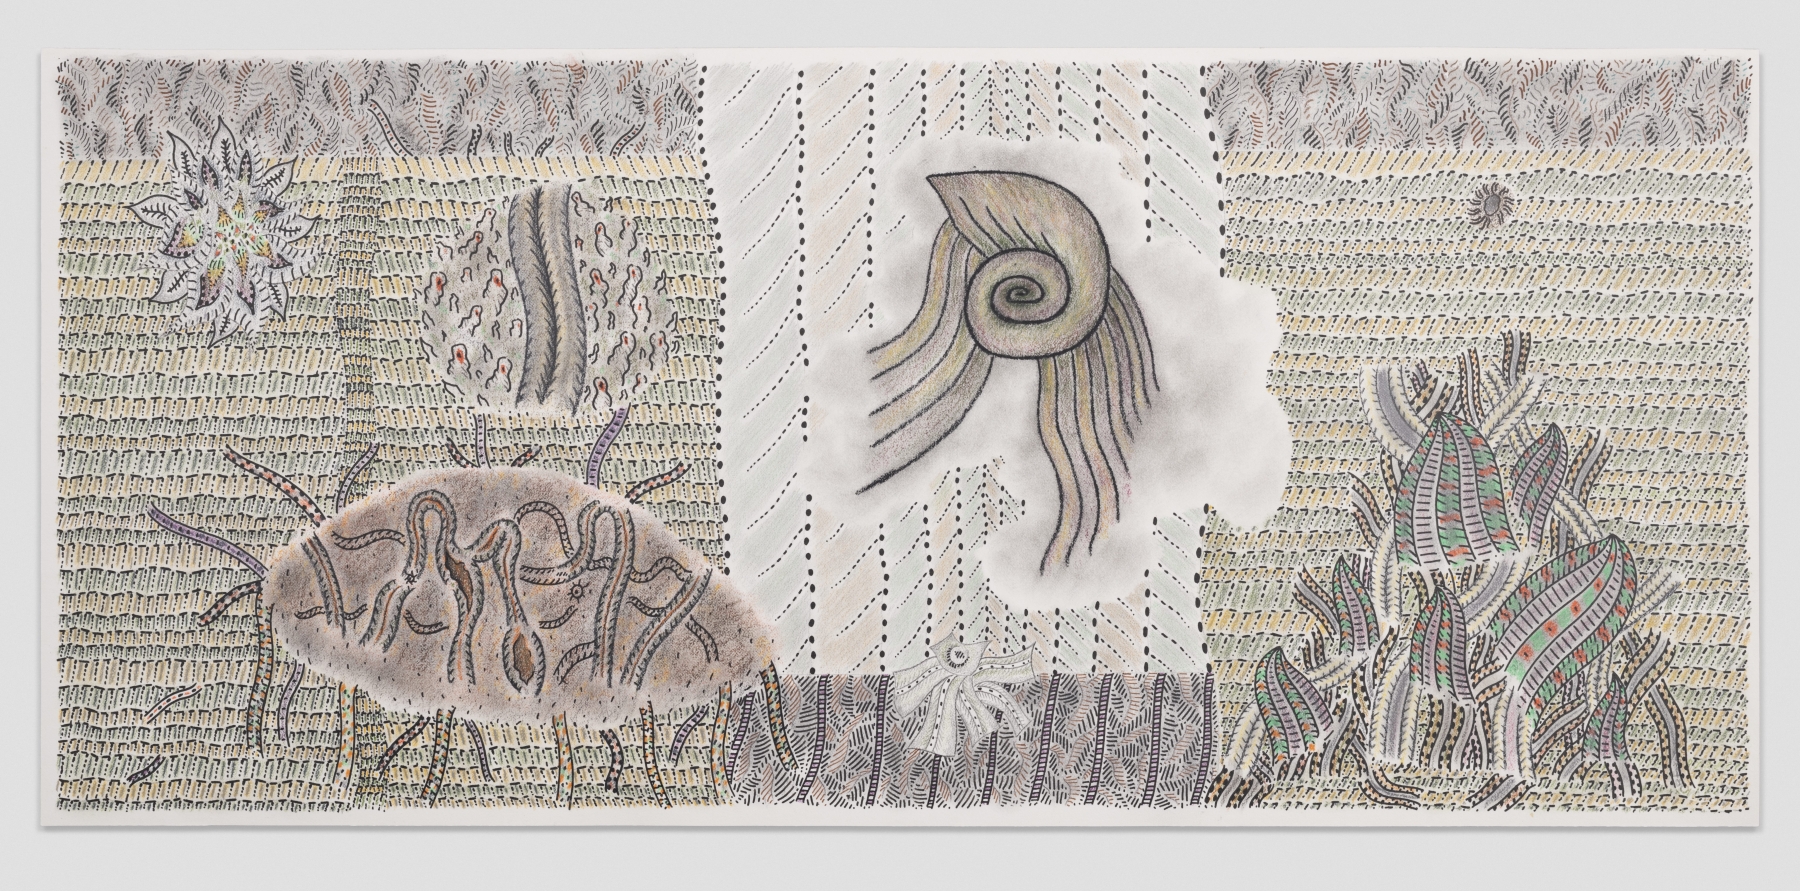 Untitled,&amp;nbsp;1982
Graphite, pastel, colored pencil and marker on paper
10 1/2 &amp;times; 23 inches
26.7 &amp;times; 58.4 centimeters&amp;nbsp;